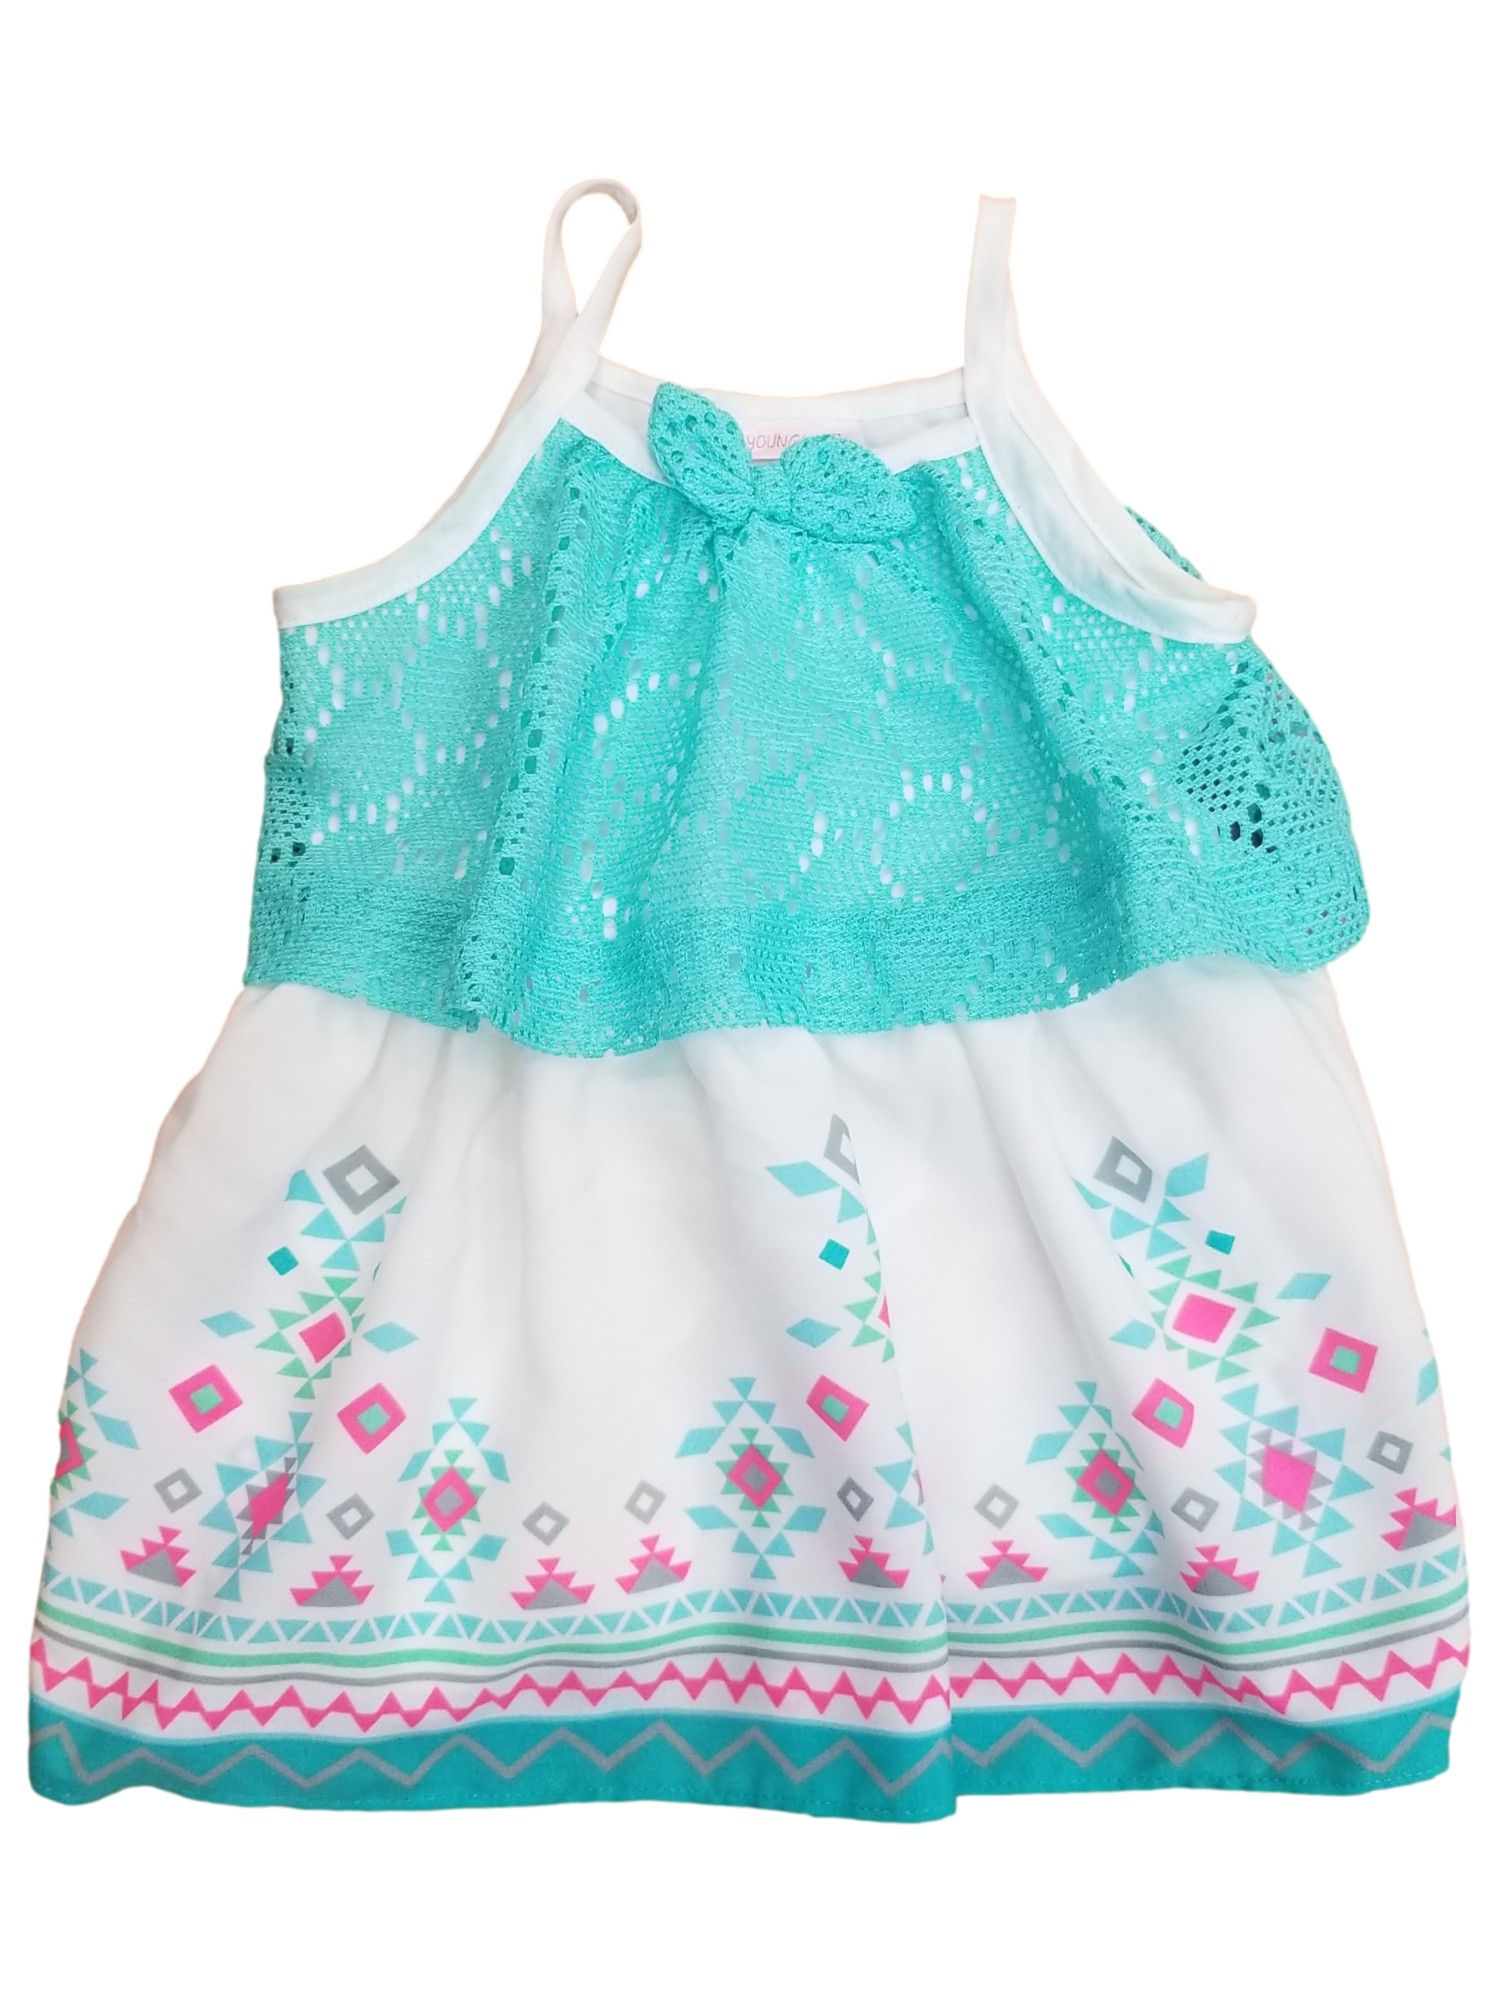 Youngland Toddler Girls Aqua Blue & White Lace Patterned Tank Dress w/ Tie 2T